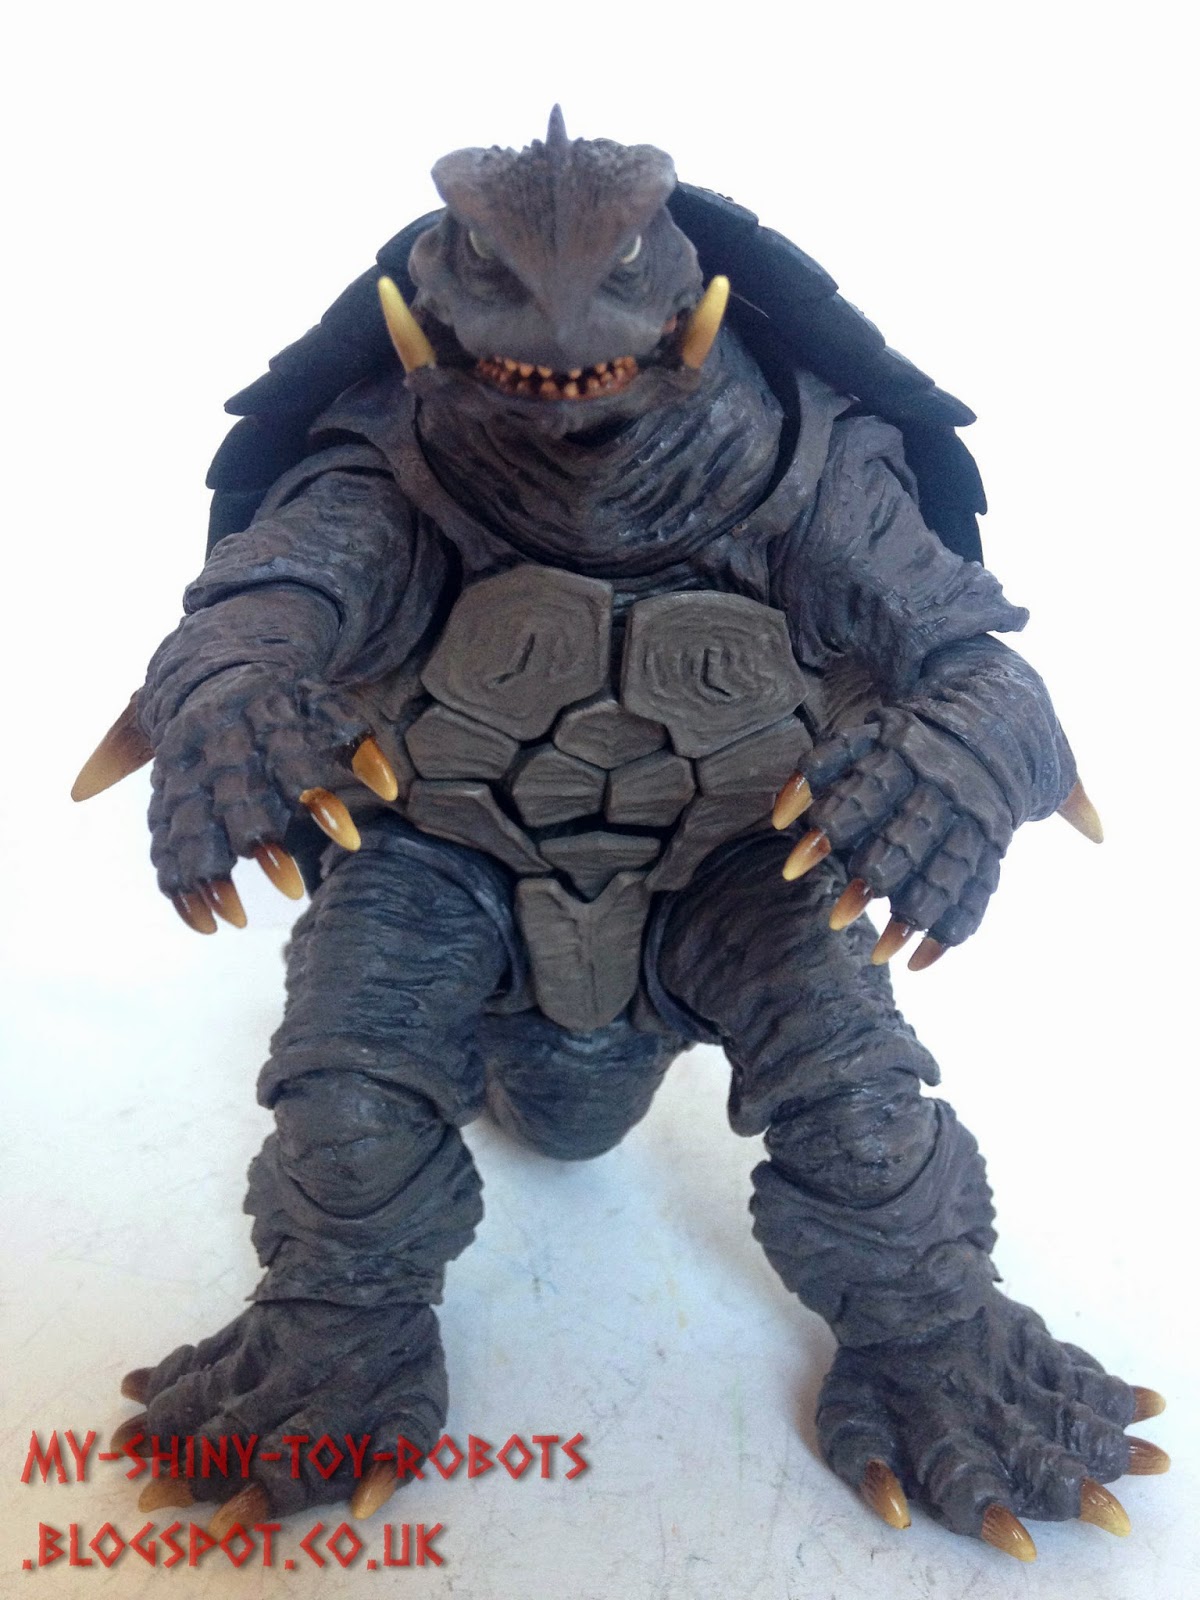 Gamera front view